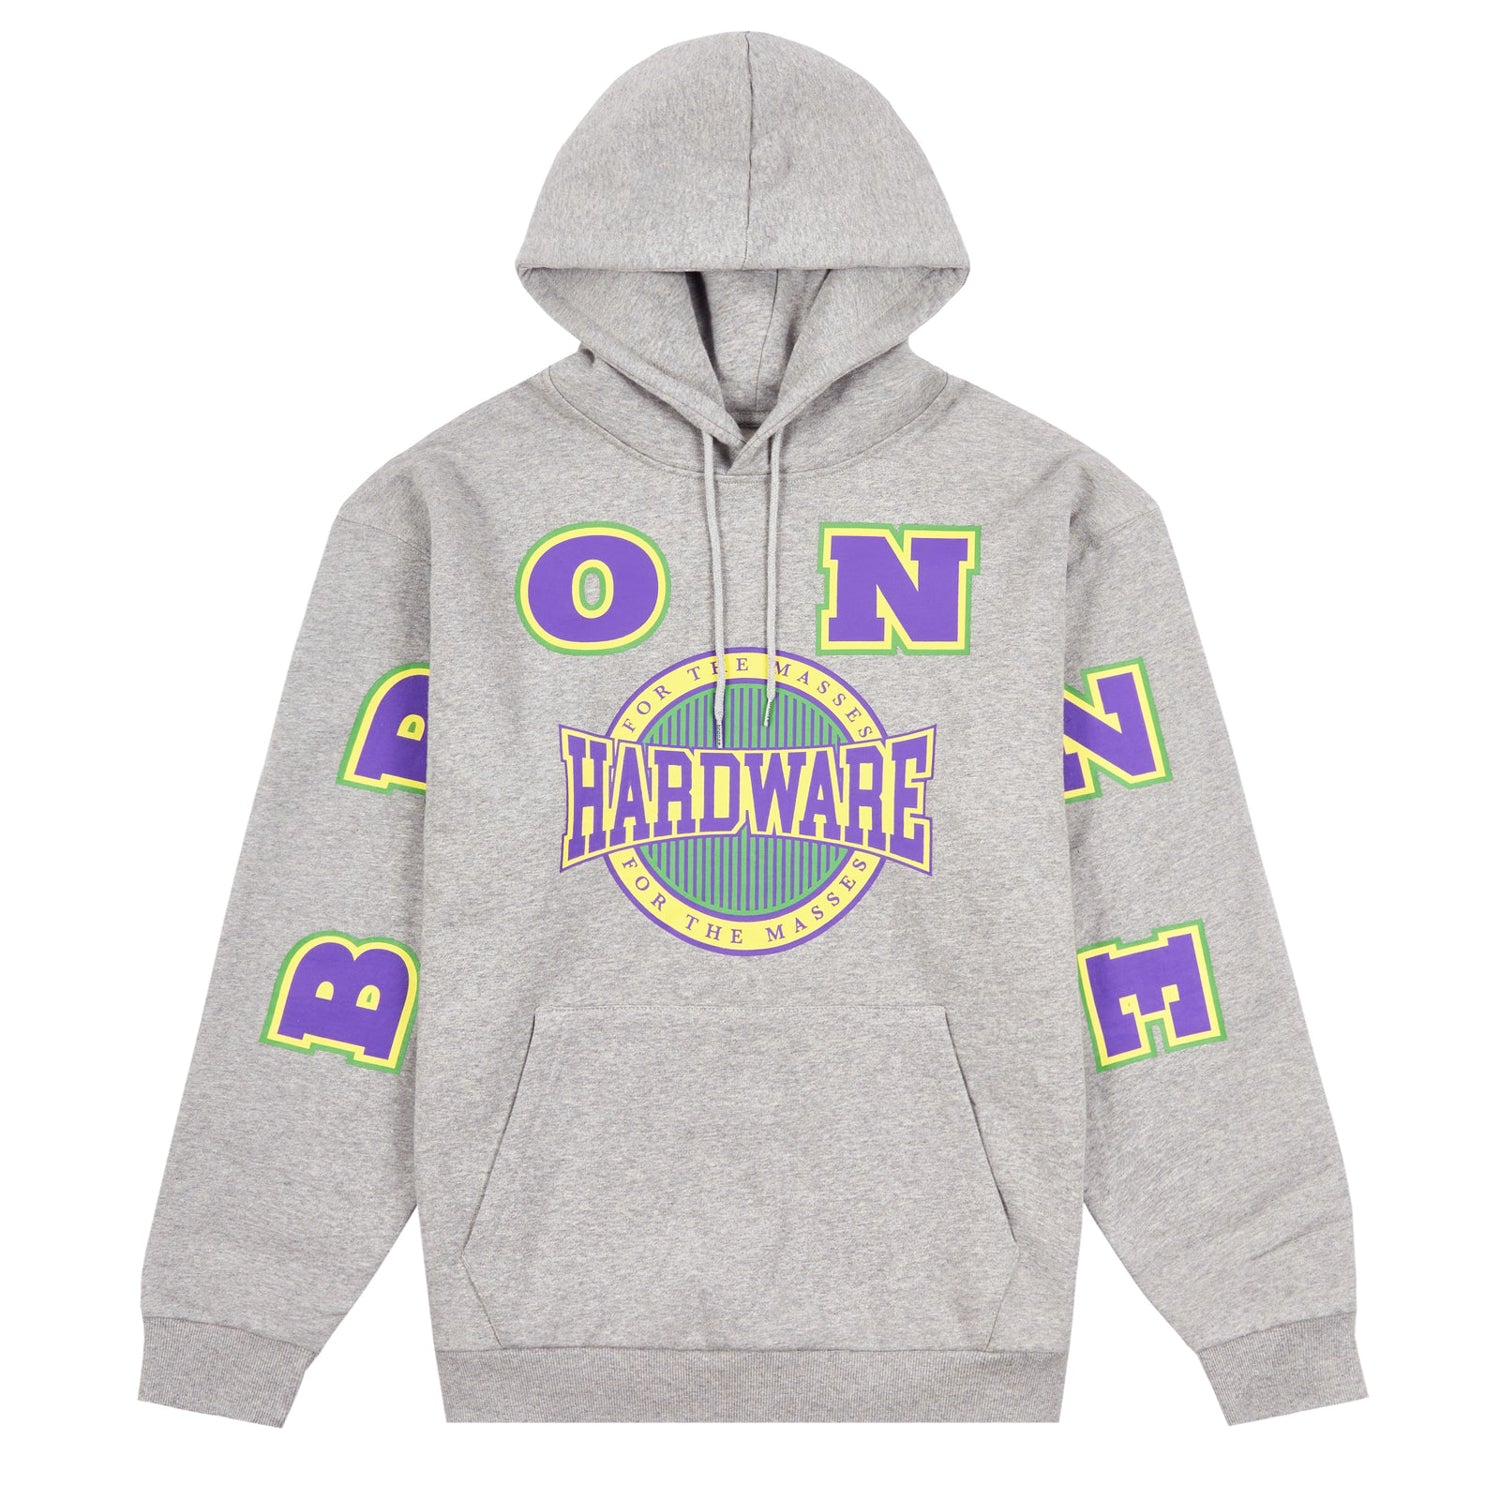 For The Masses Hoody, Grey